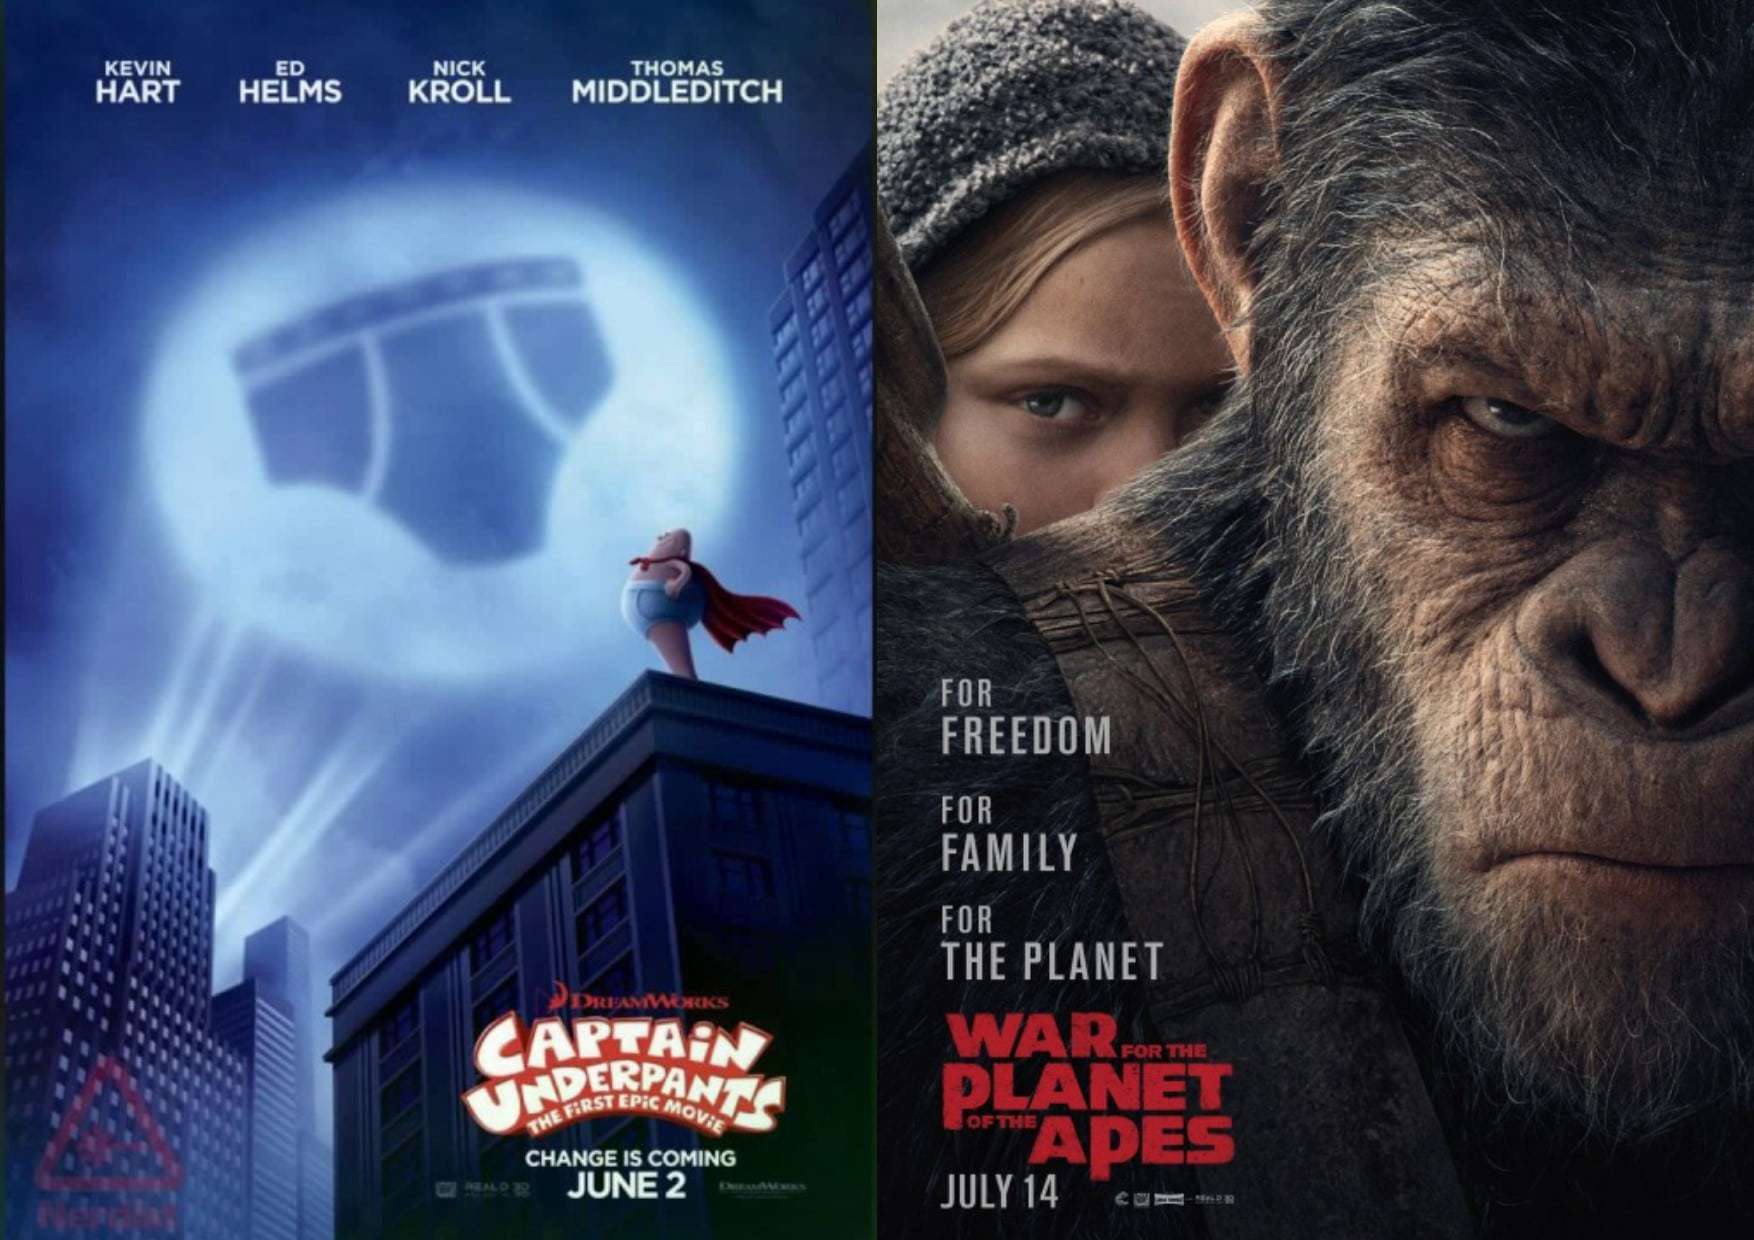 March 24: Captain Underpants braves Planet of the Apes - Ipswich First1754 x 1240